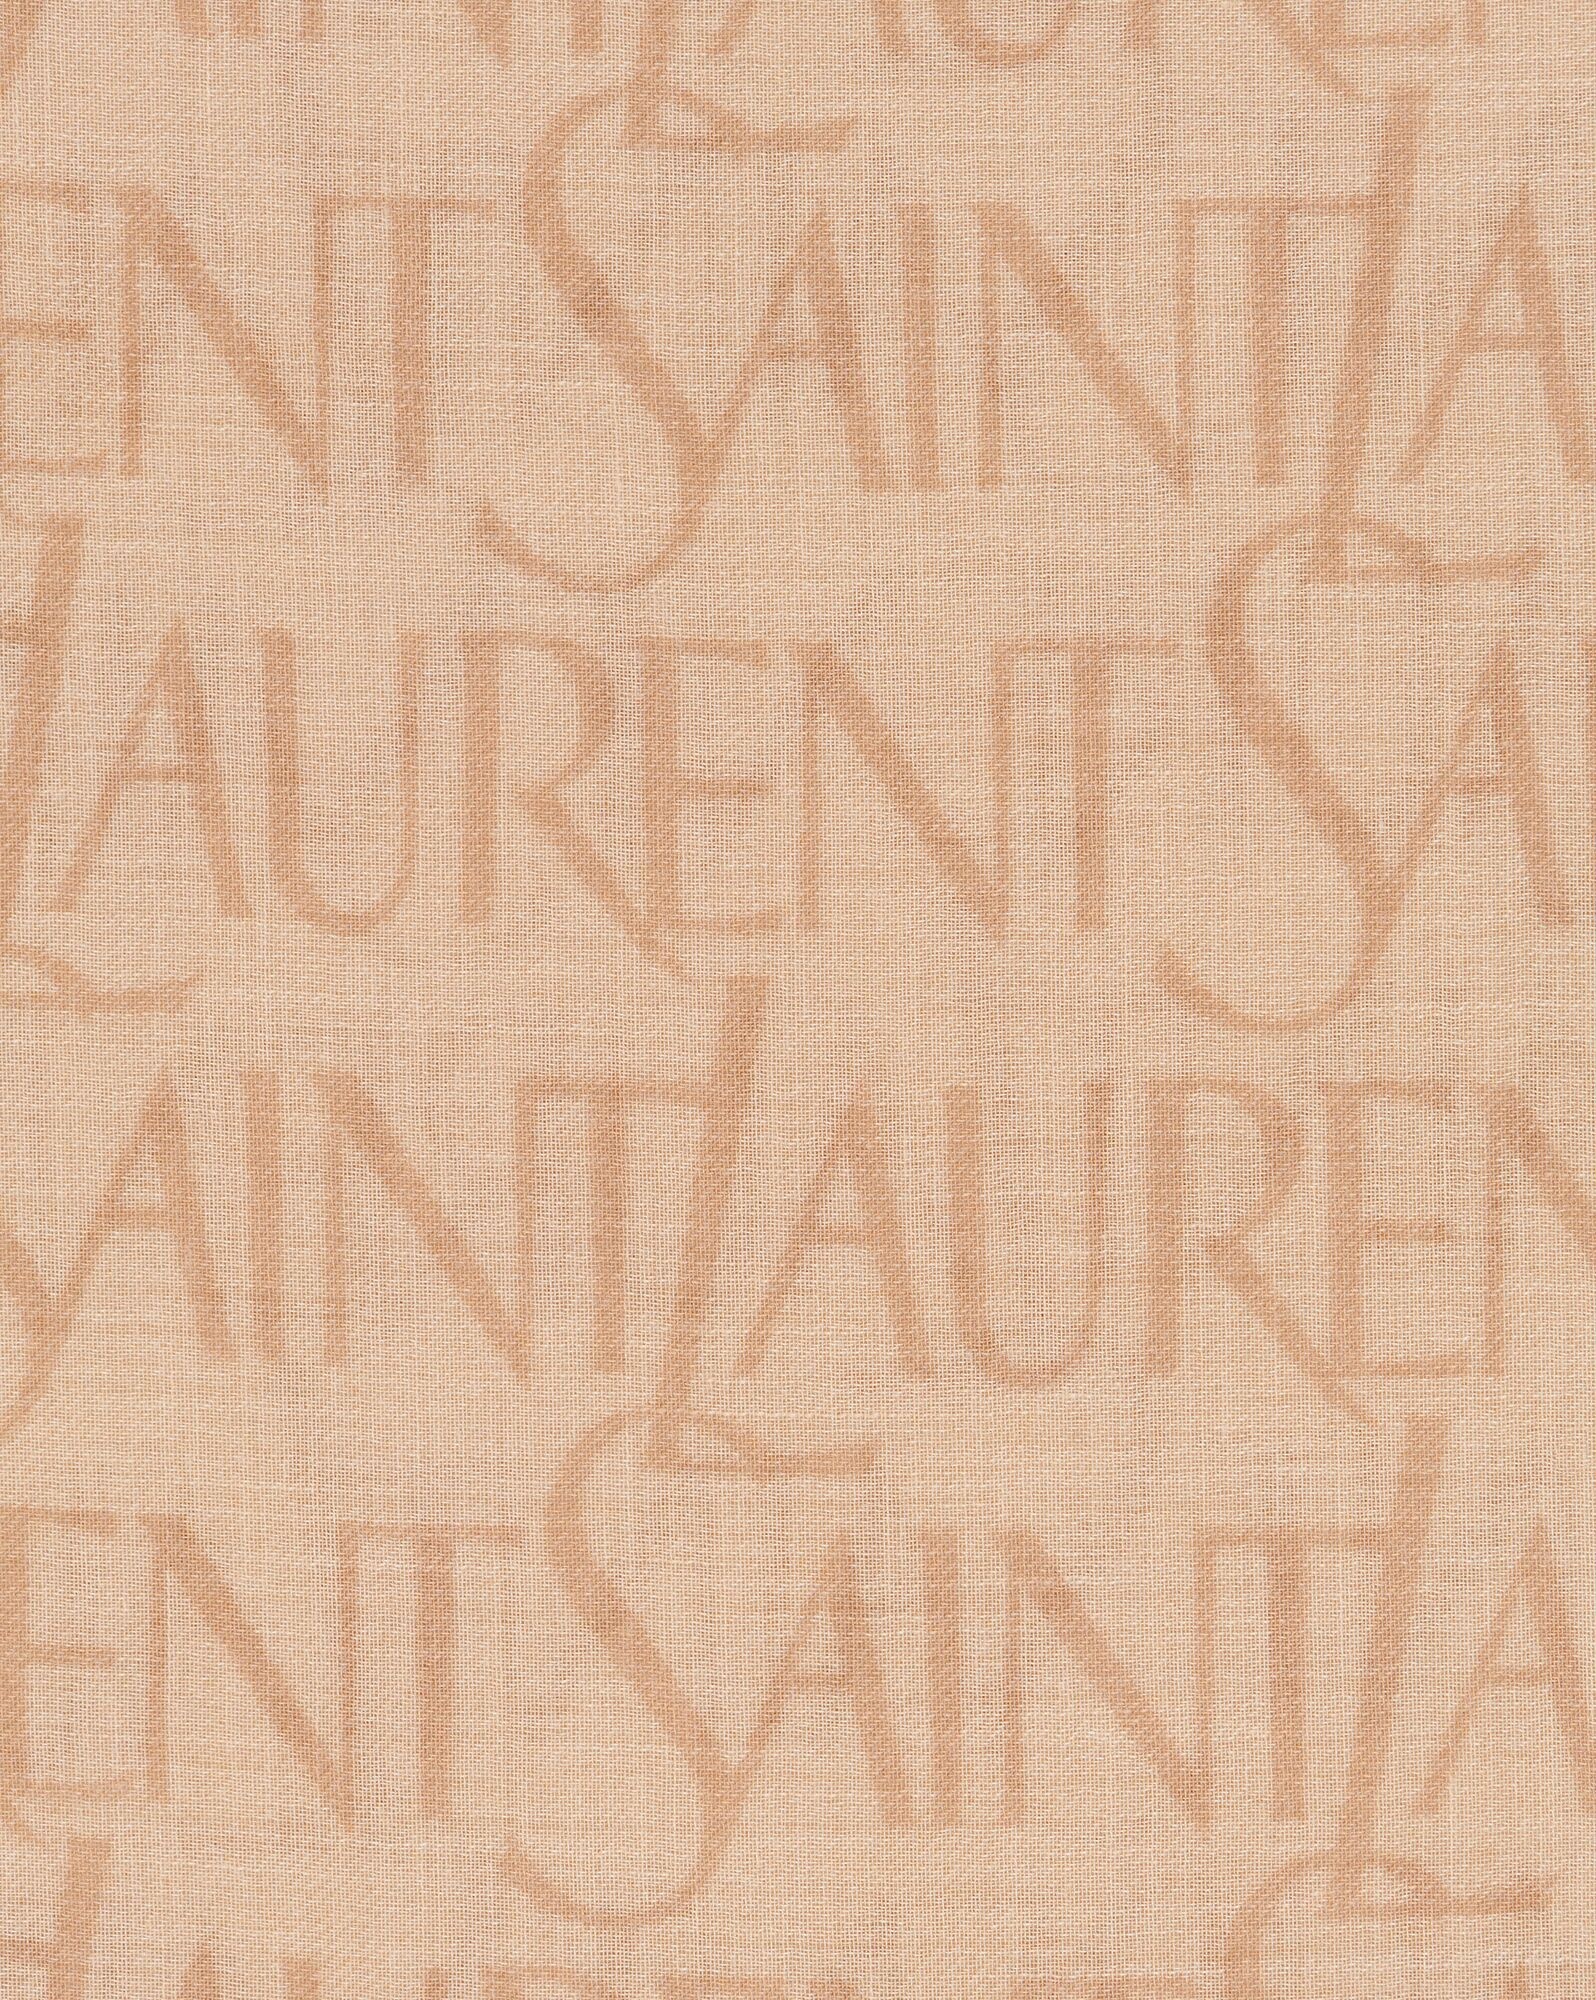 saint laurent large square scarf in modal and cashmere - 3